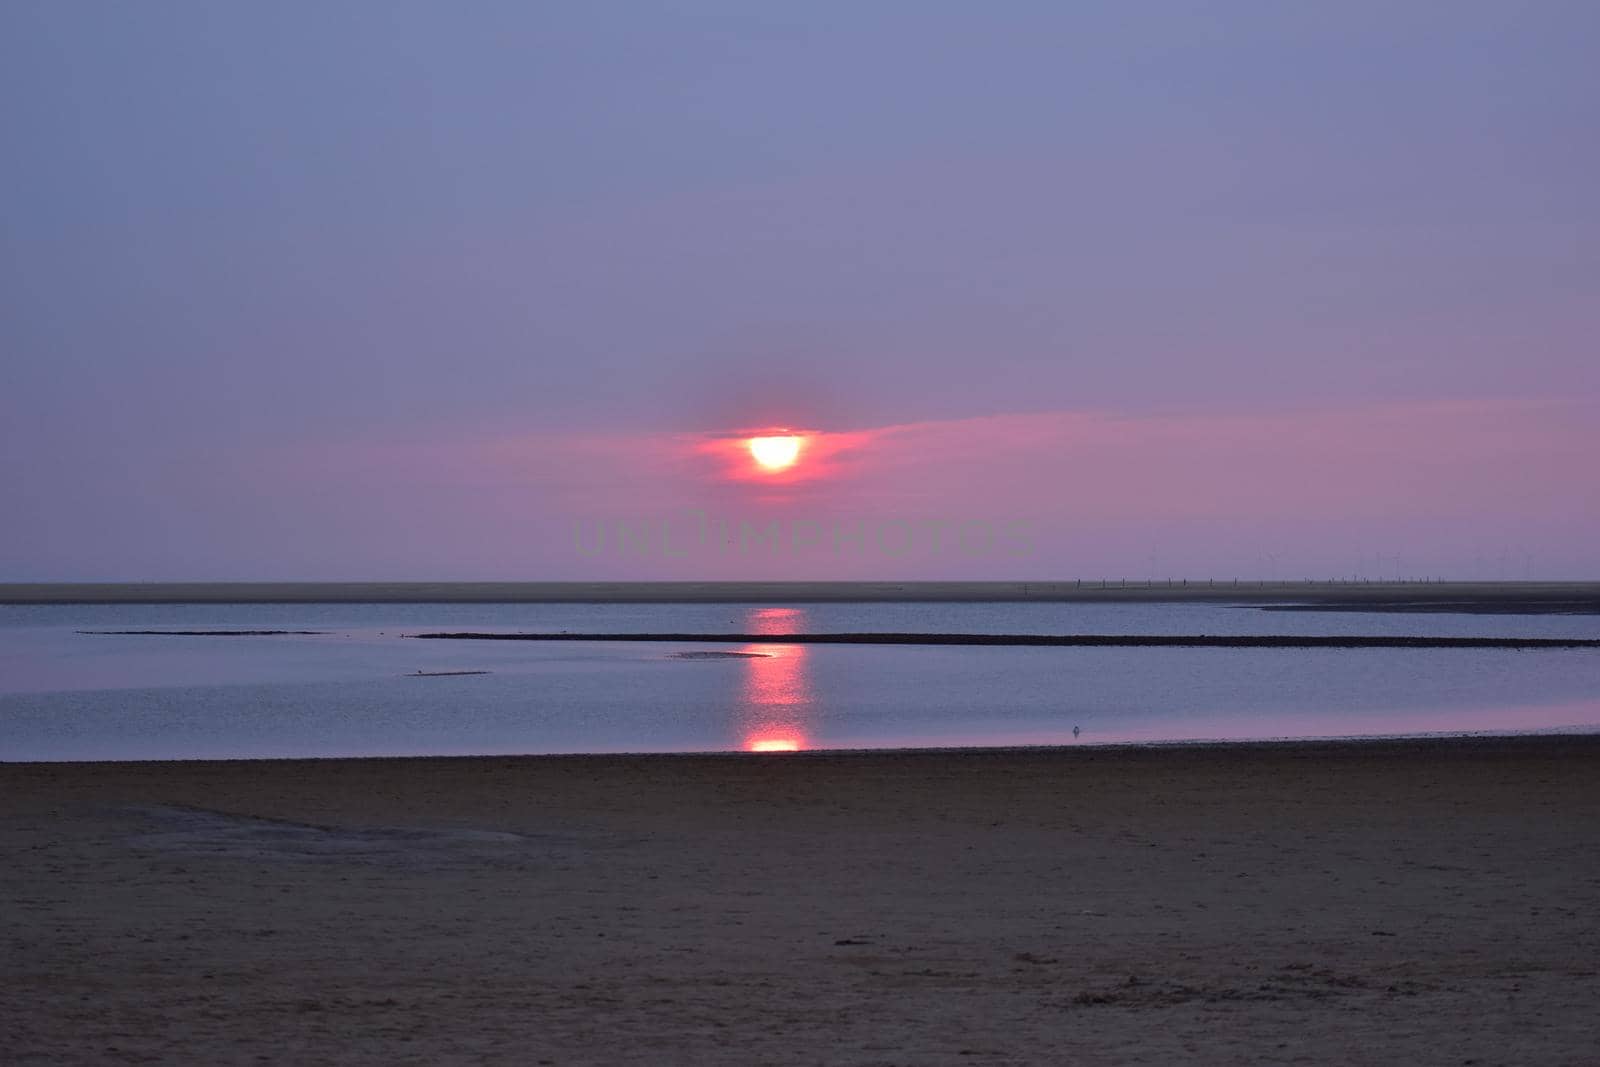 Colorful sunset at a beach at the North Sea by Luise123